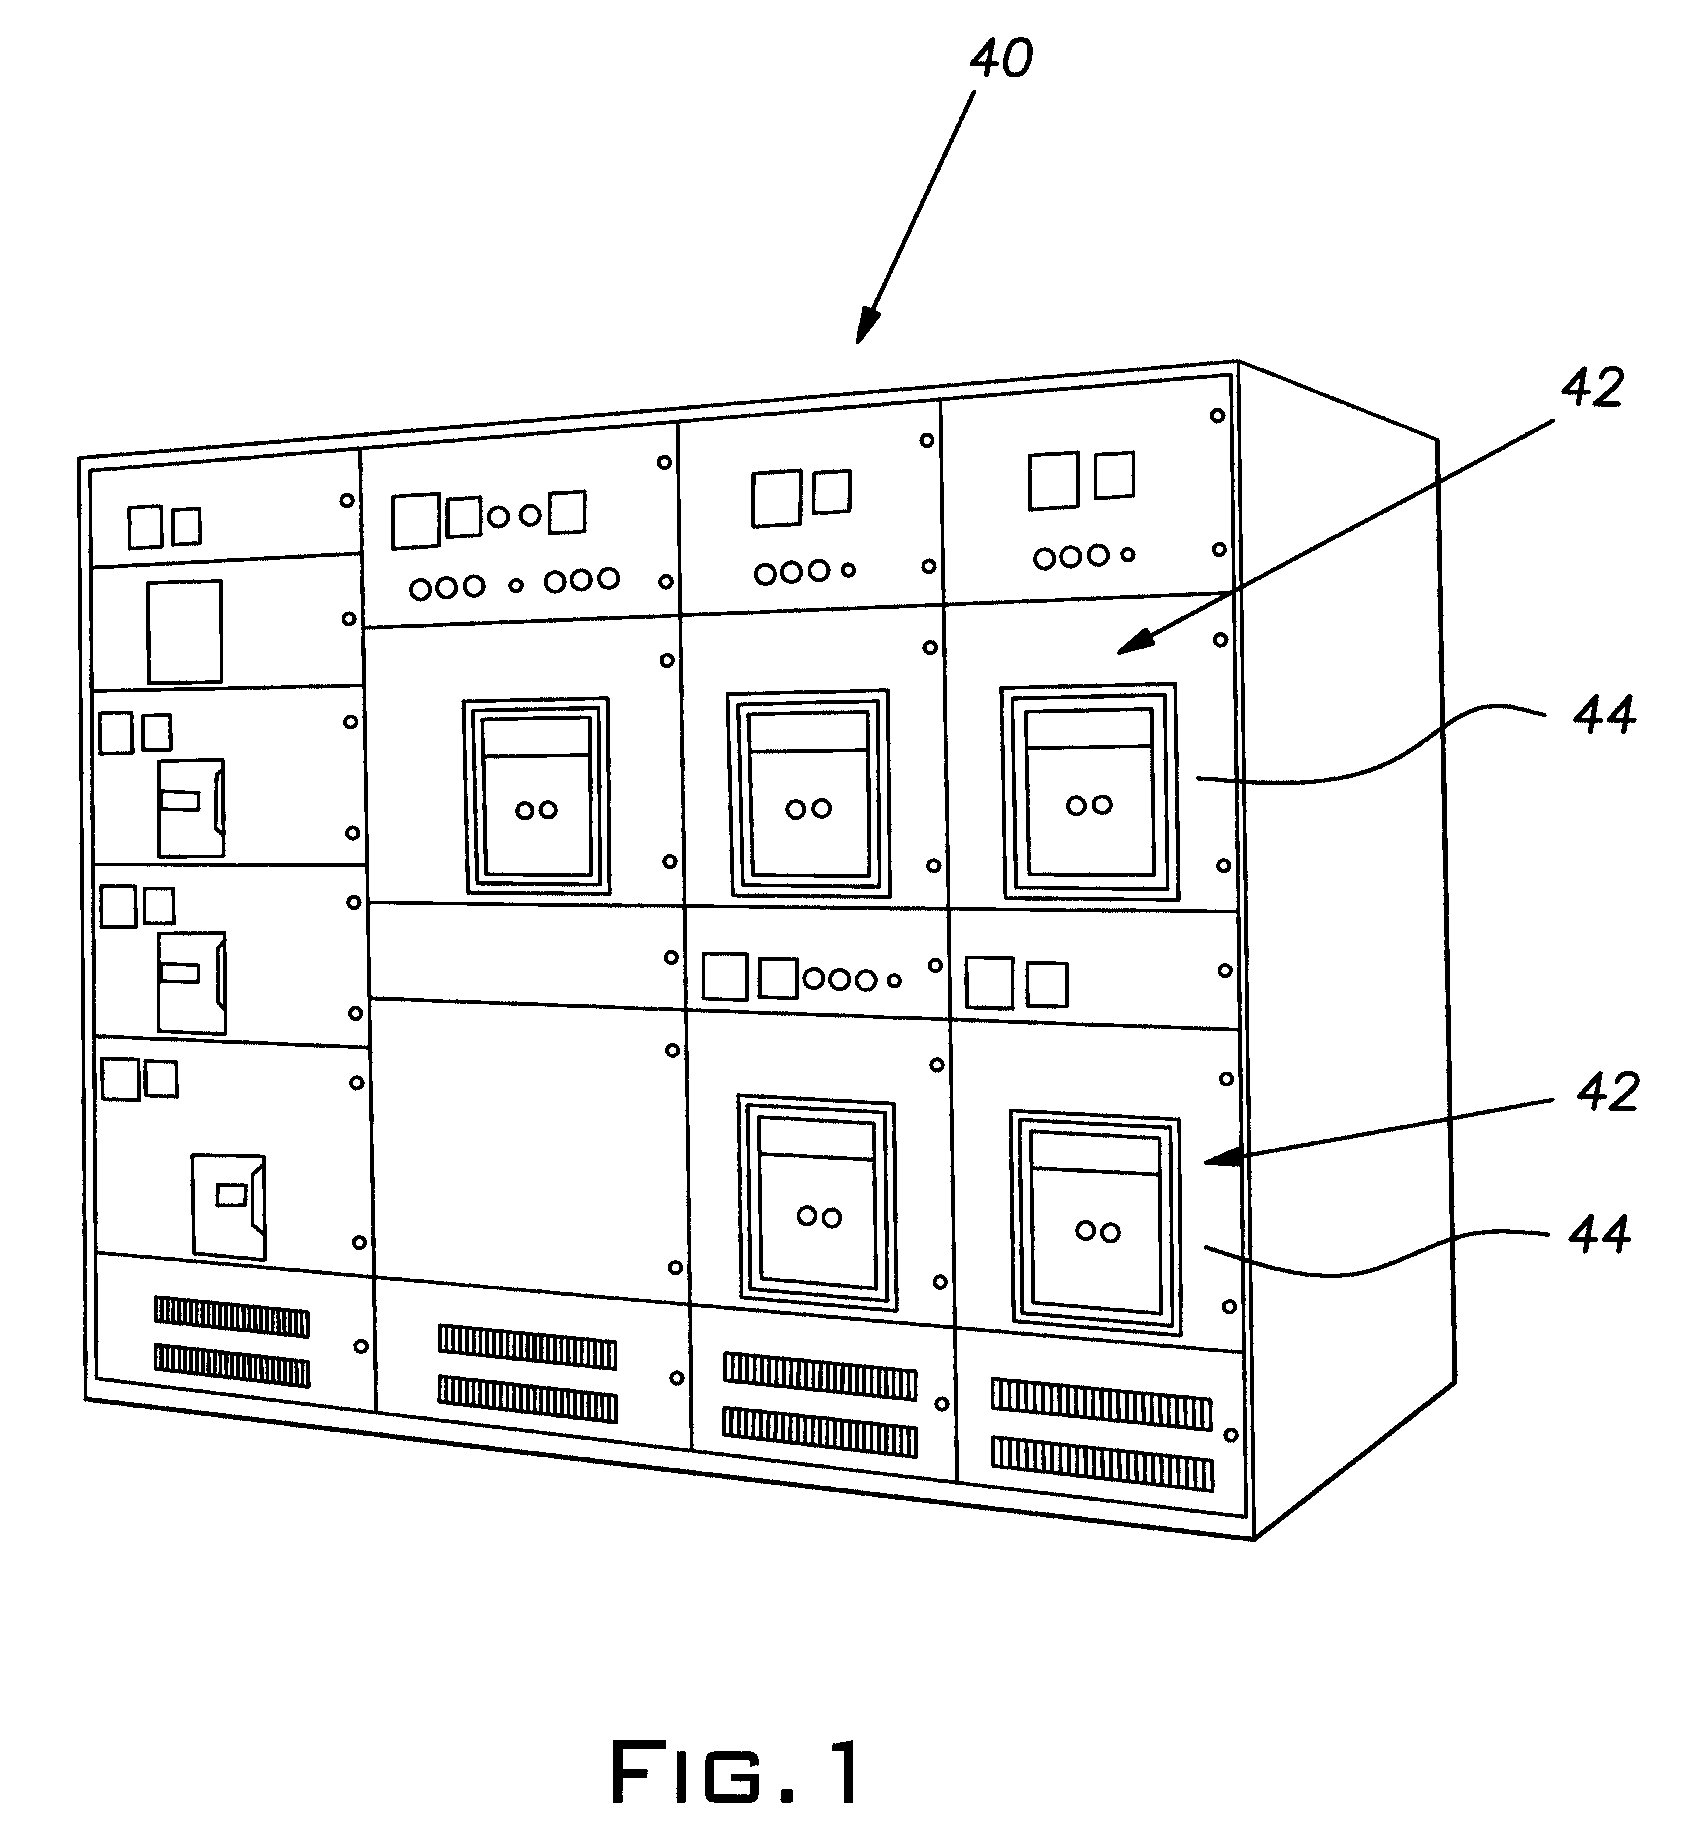 Circuit breaker cradle with an interlock system and a method of using the same